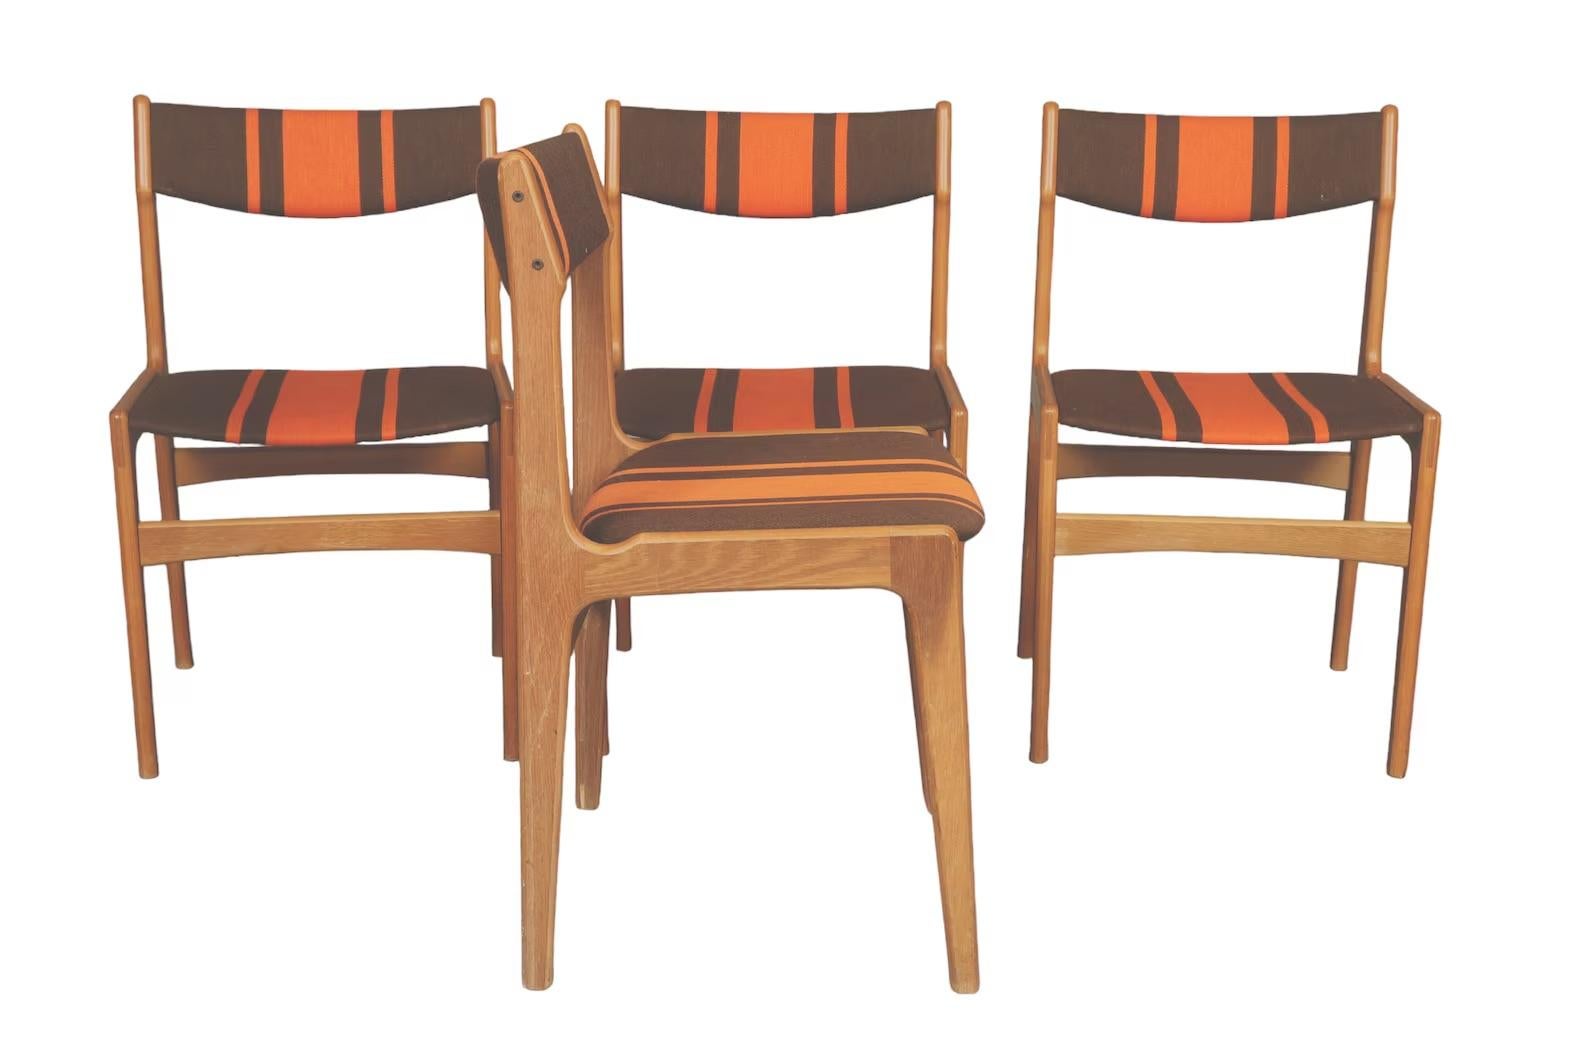 Mid-Century Teak dinning chairs (Set 4)

Dimensions:
each chair: 
W19 x D16 x H31 inches
Seat height: 17 inches
Condition: very good